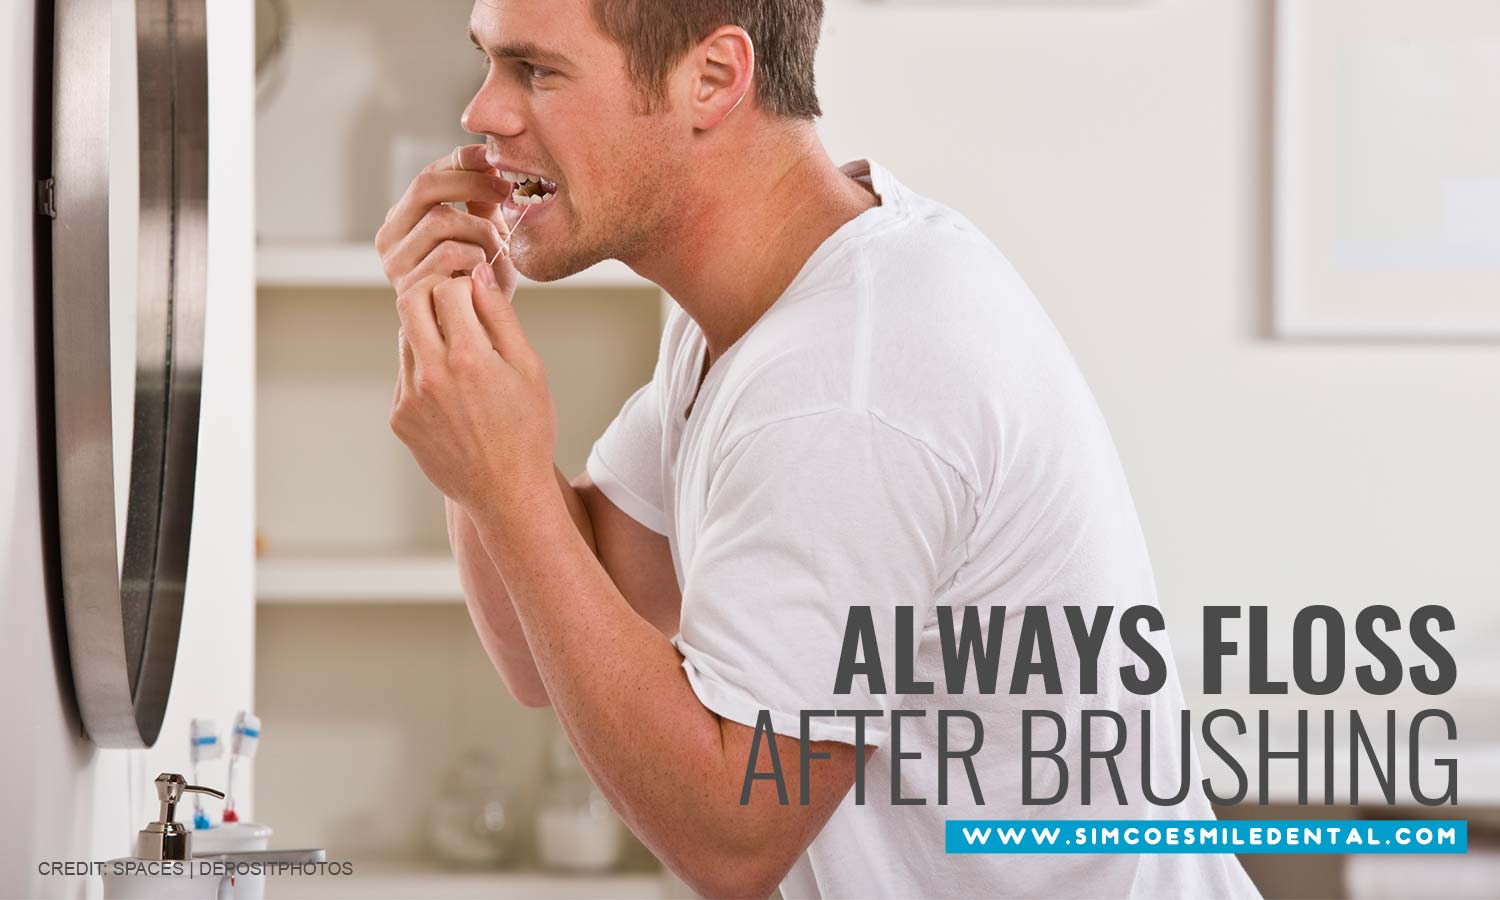 Always floss after brushing